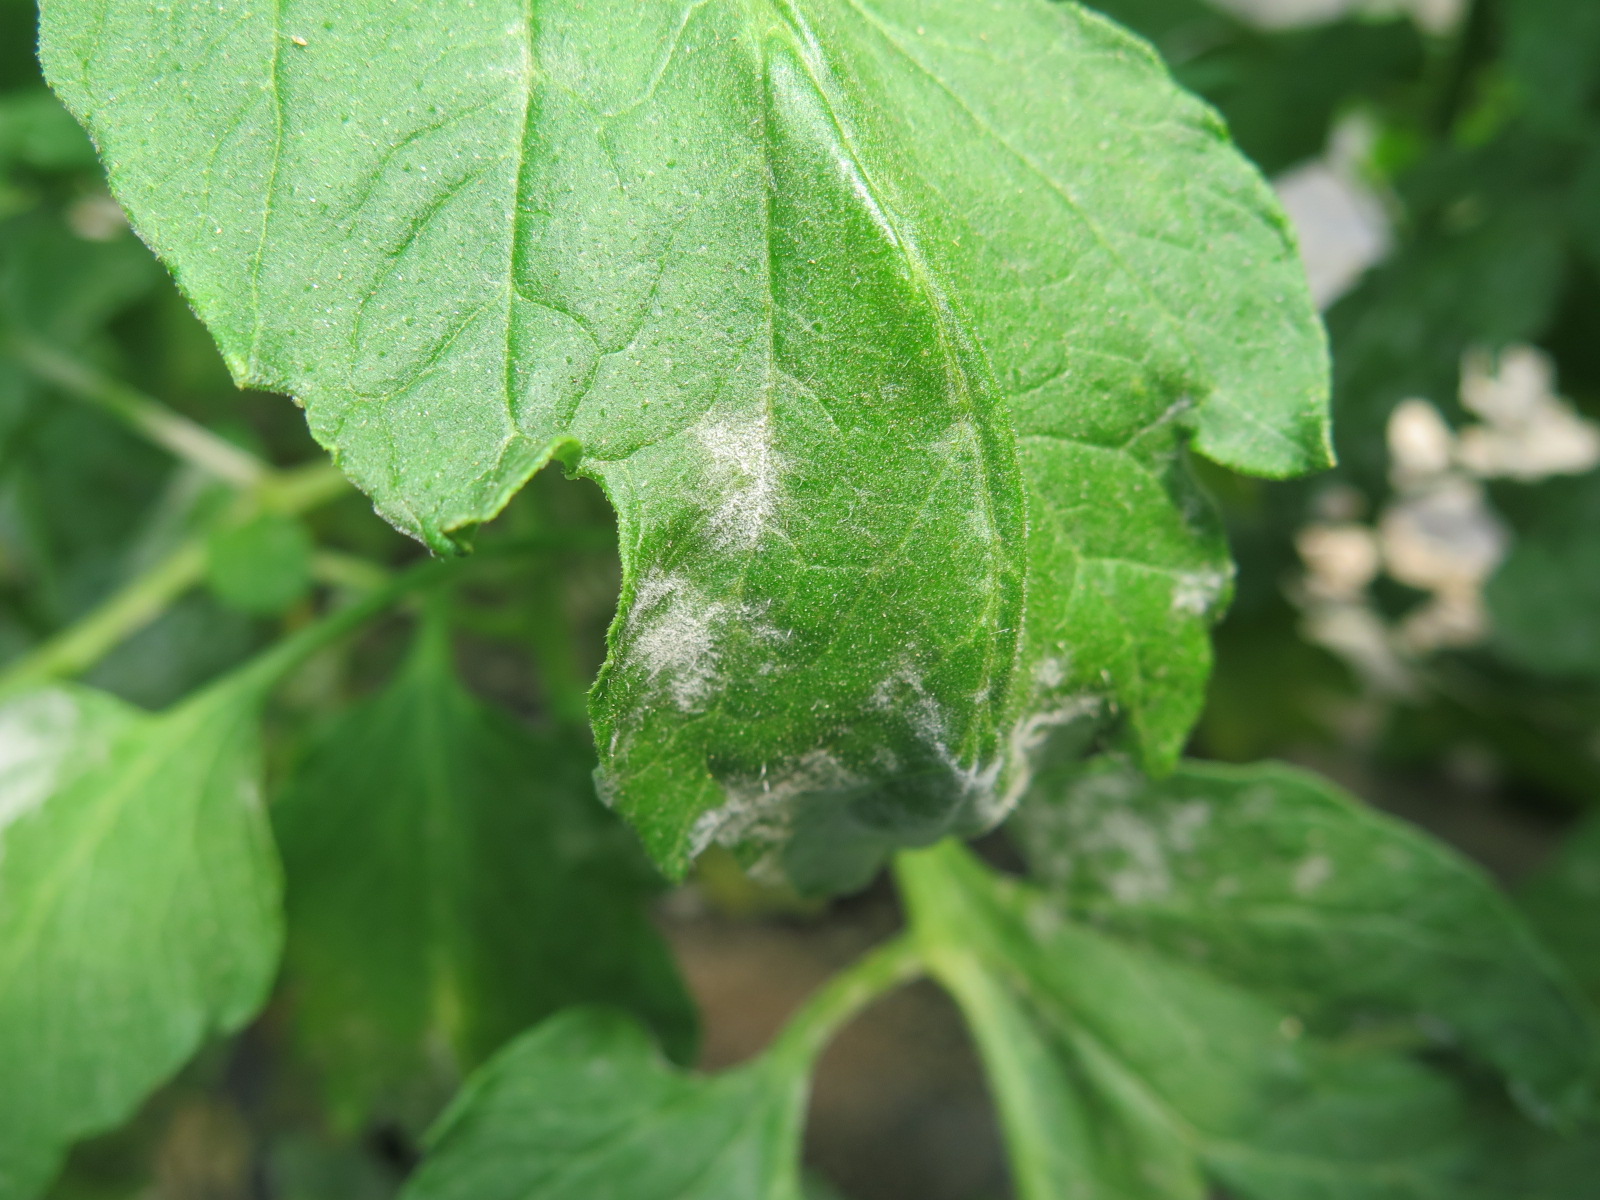 A close up of powdery mildew on tomato leaves.